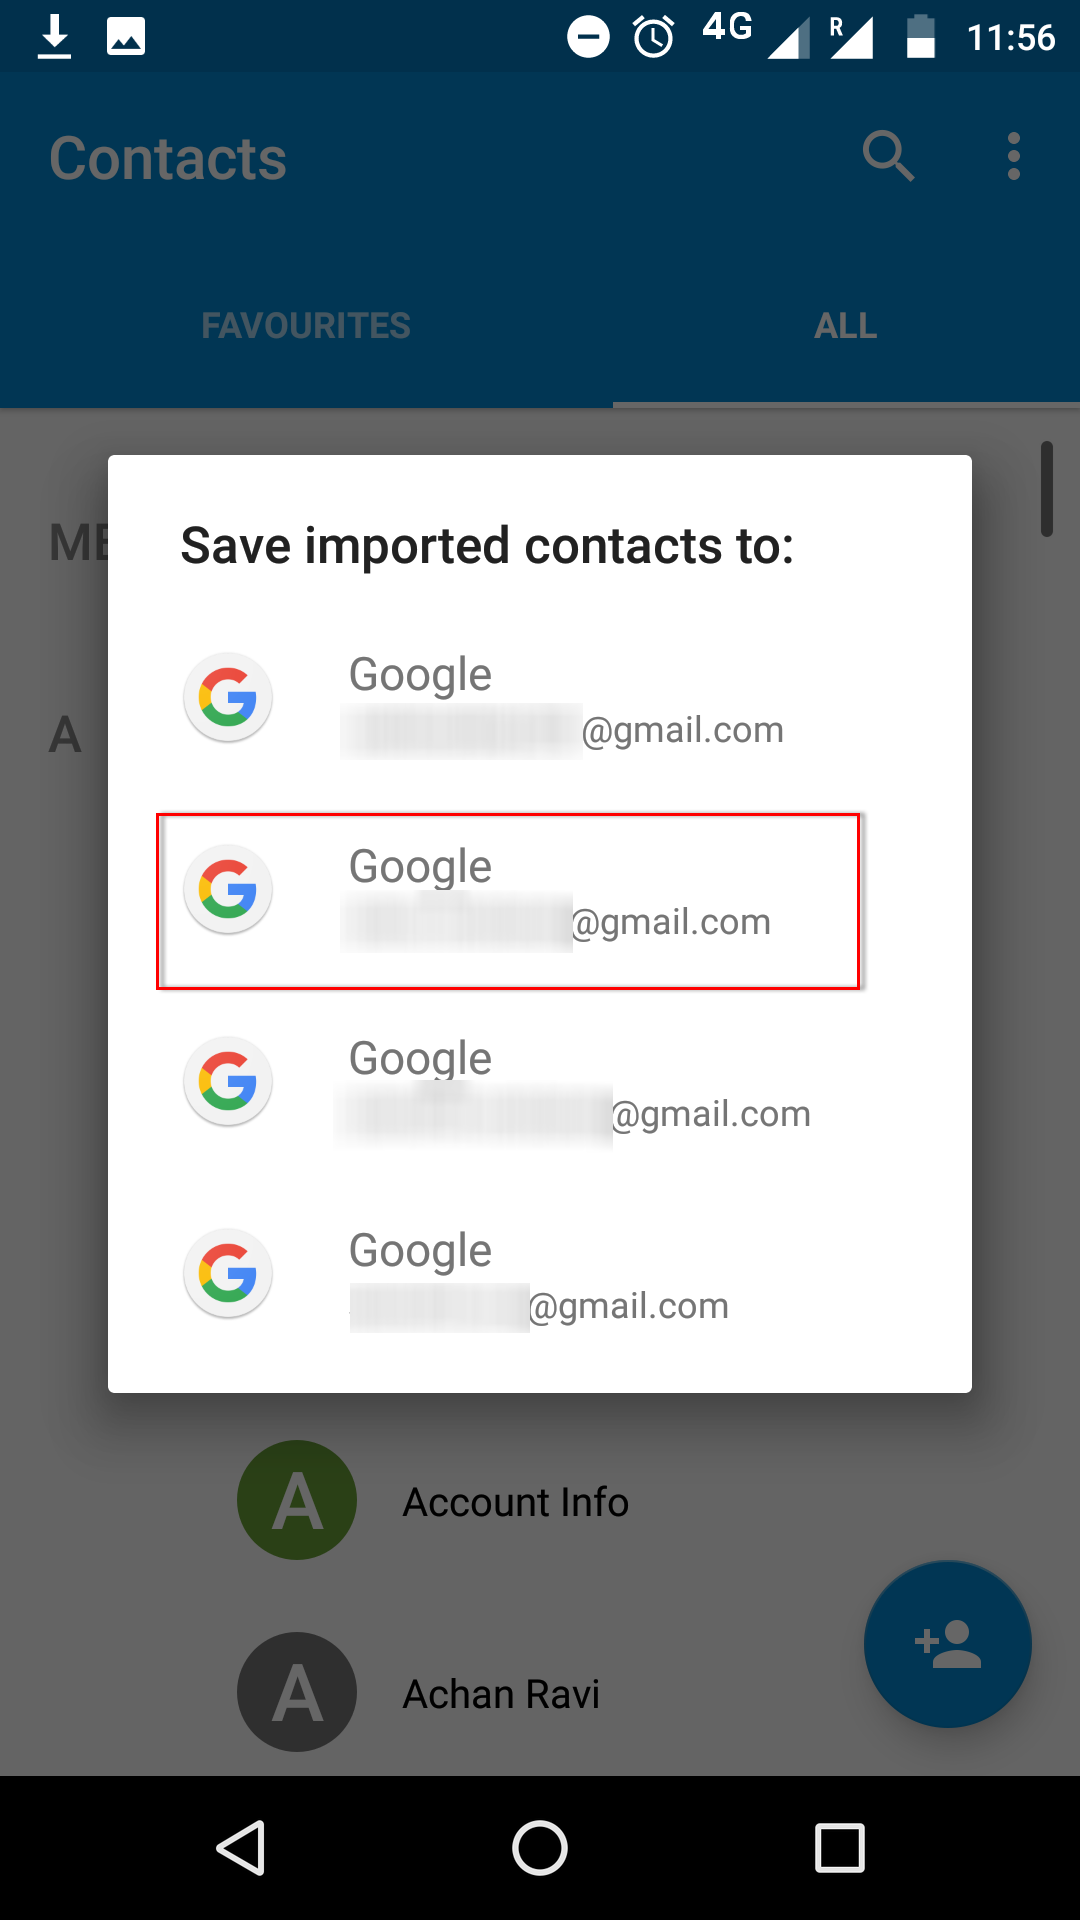 select the Gmail account